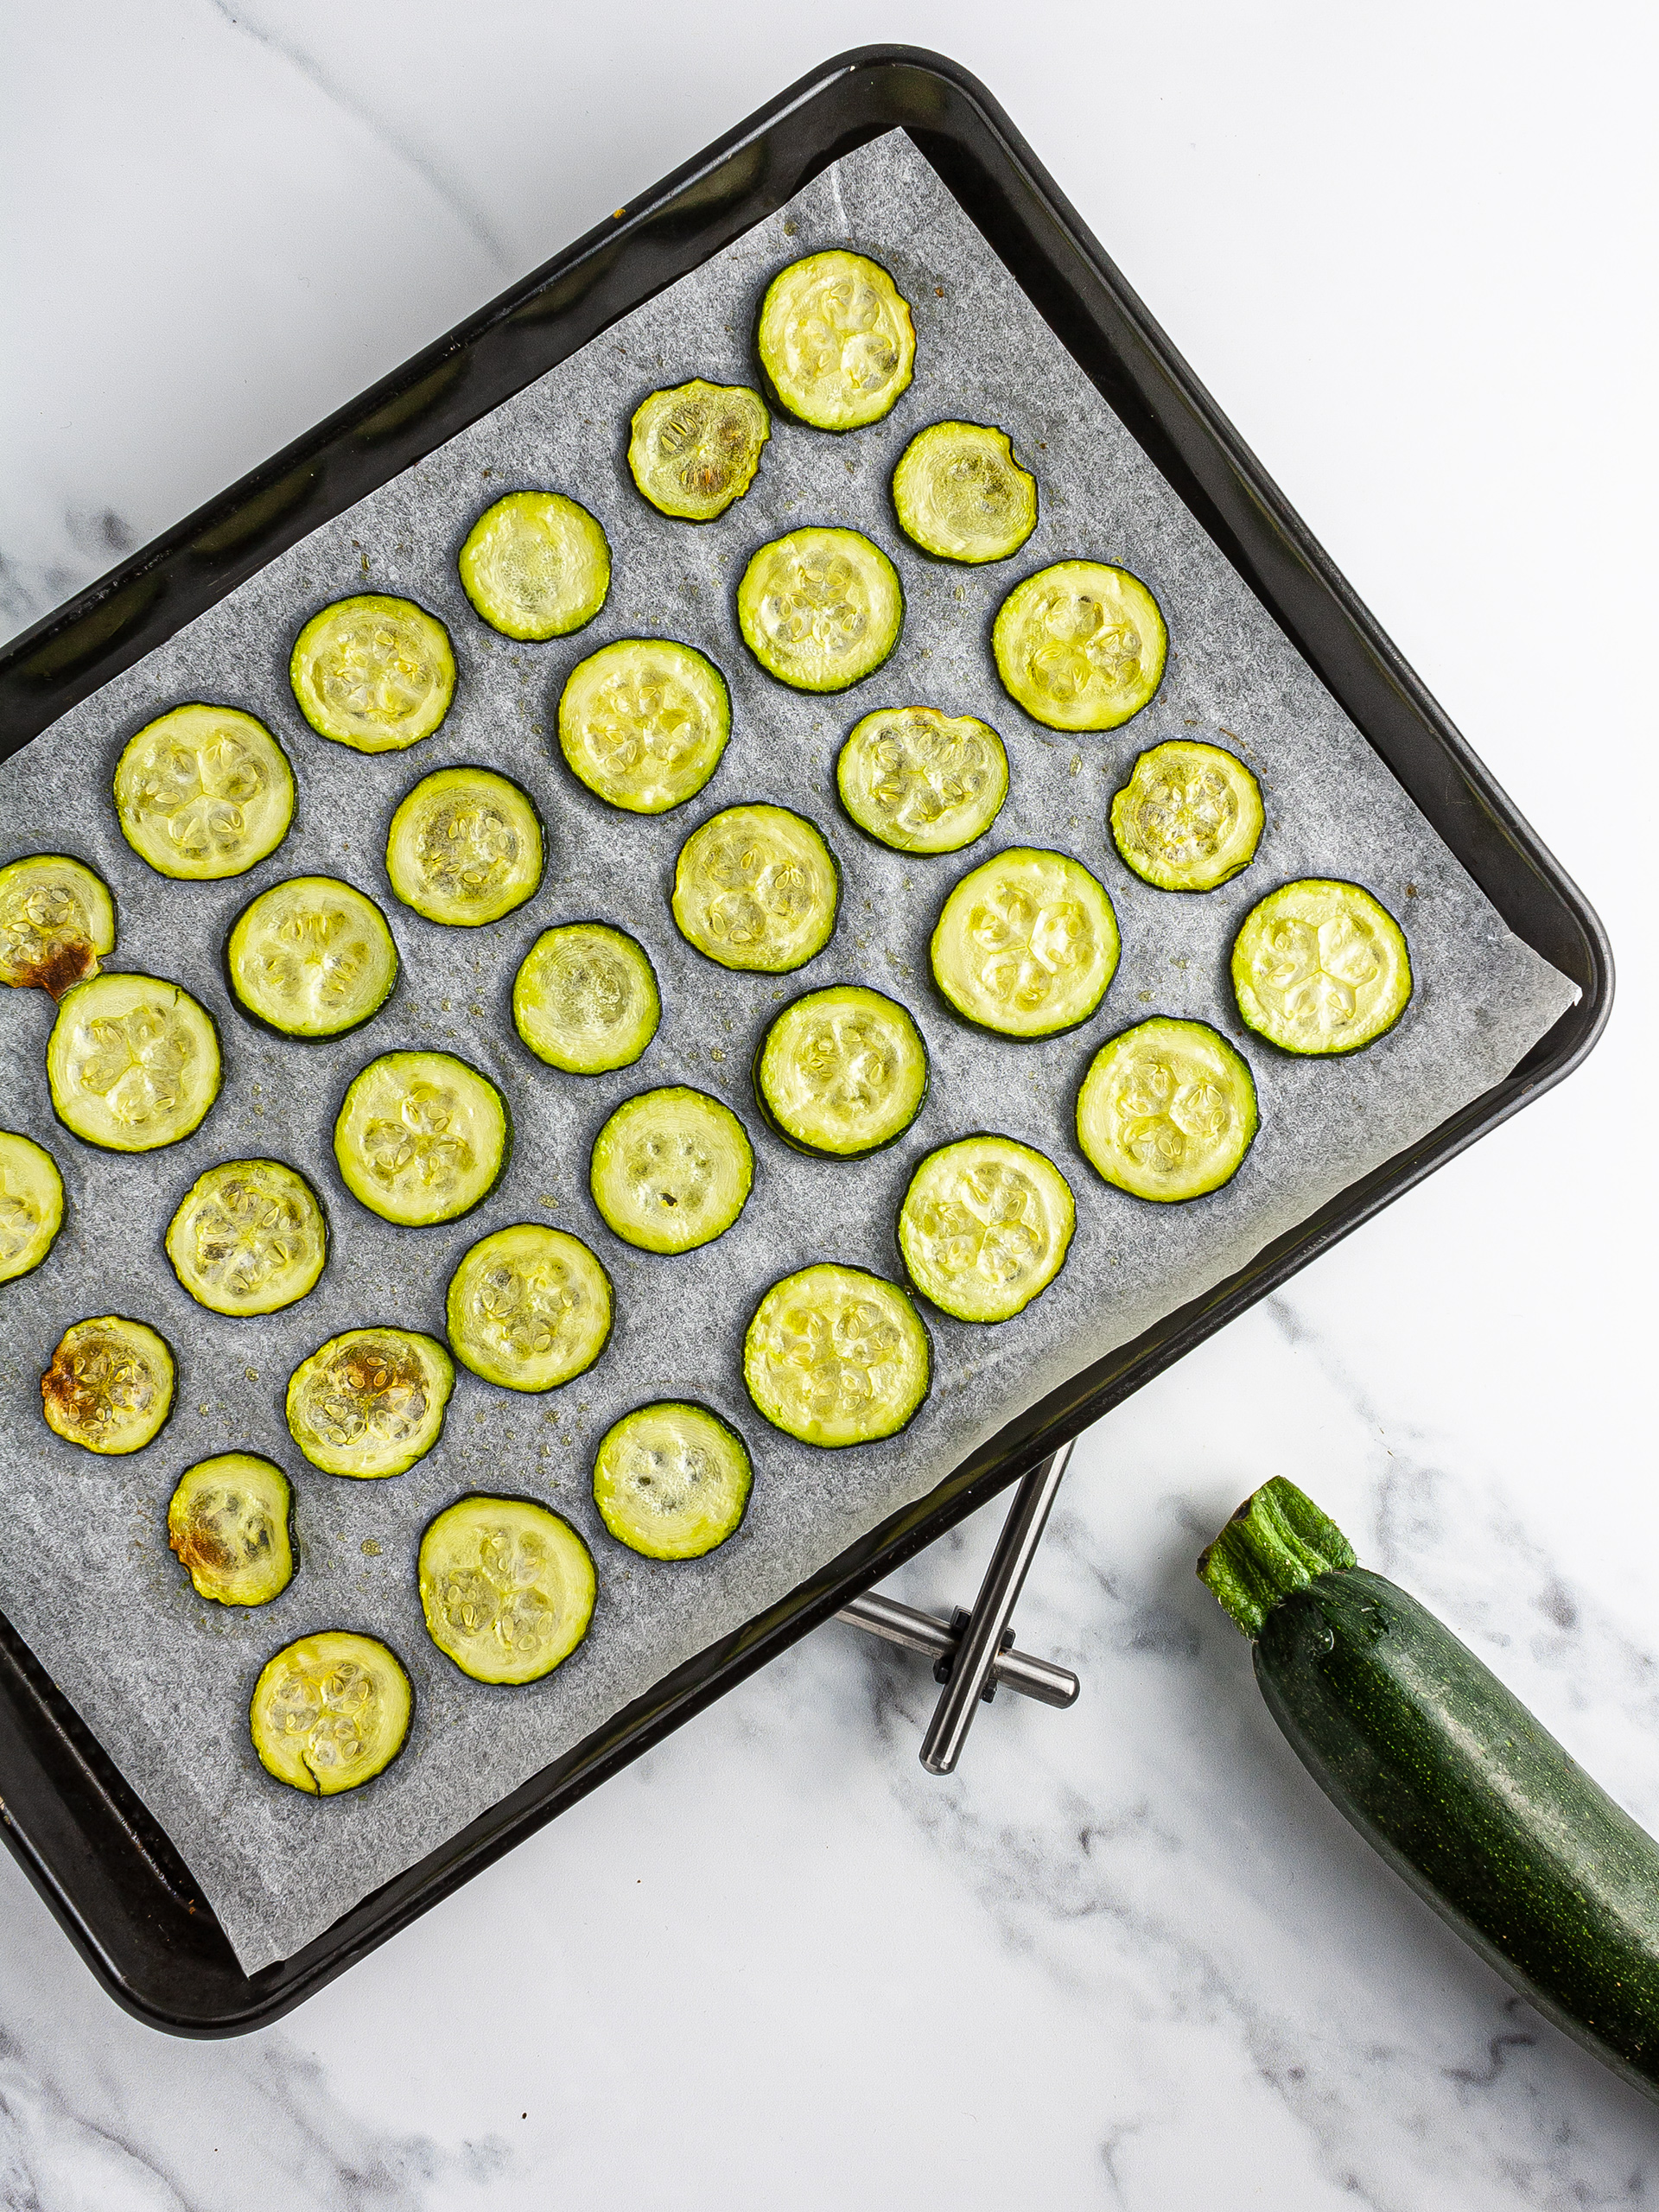 Baked courgettes.